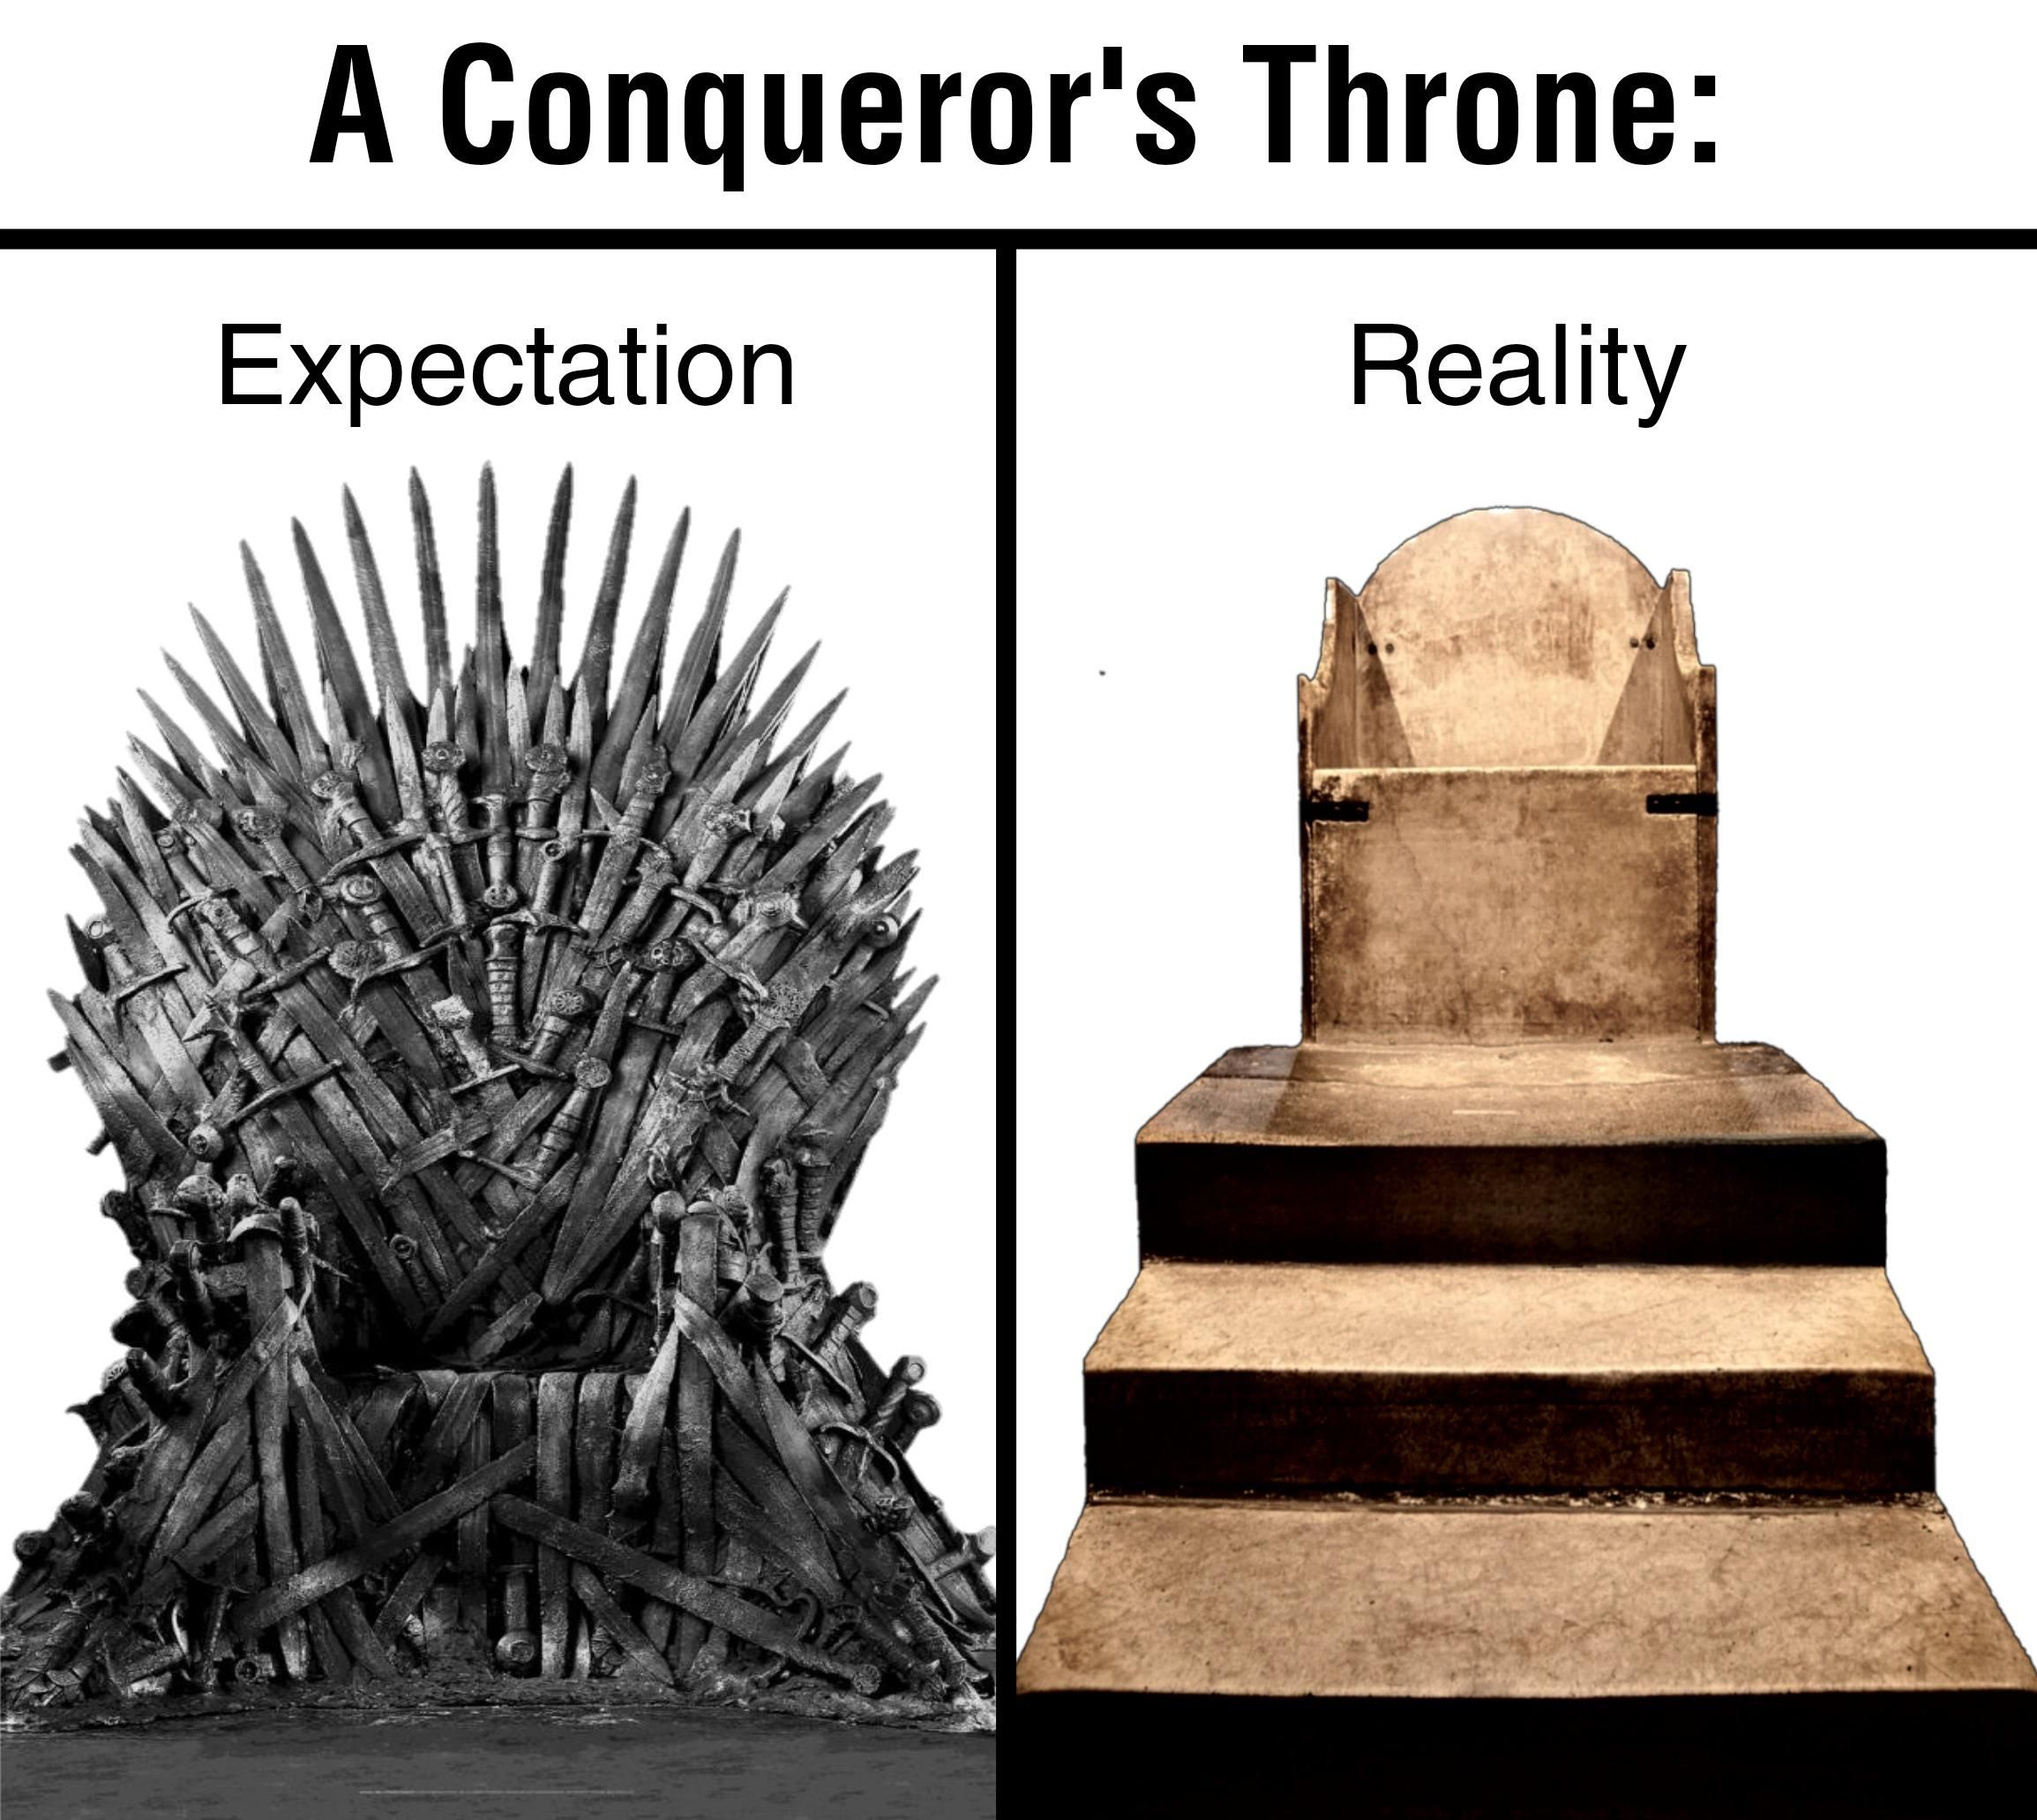 Conquerors don't need the extra bling. They are the bling.